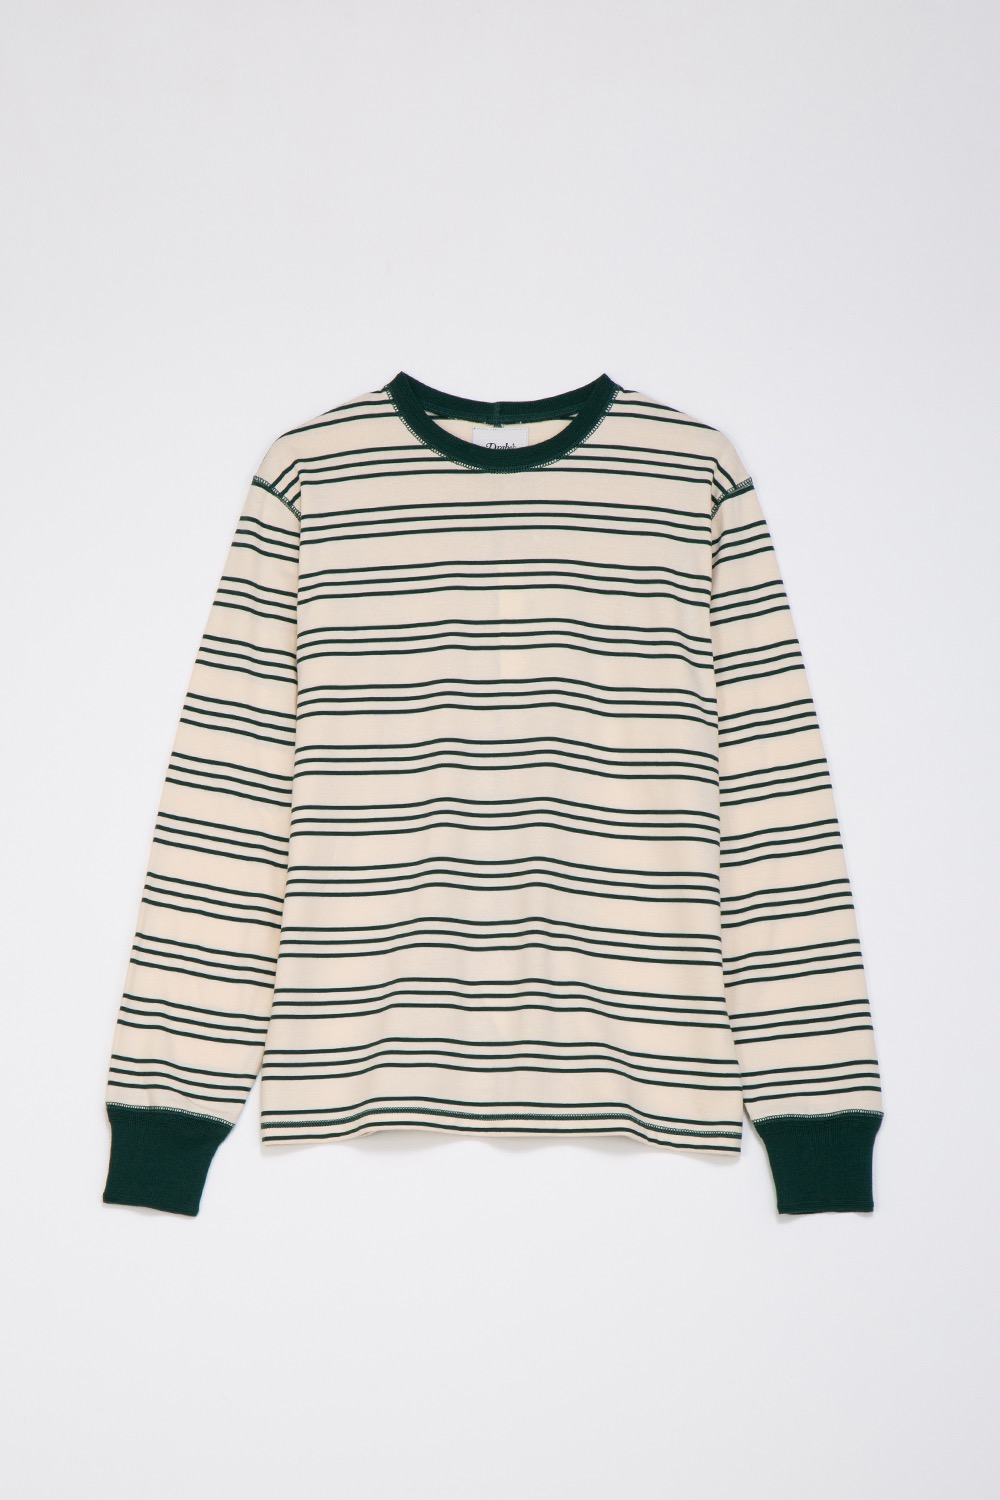 (CARRY OVER) STRIPE LONG-SLEEVED HIKING T-SHIRT GREEN AND WHITE